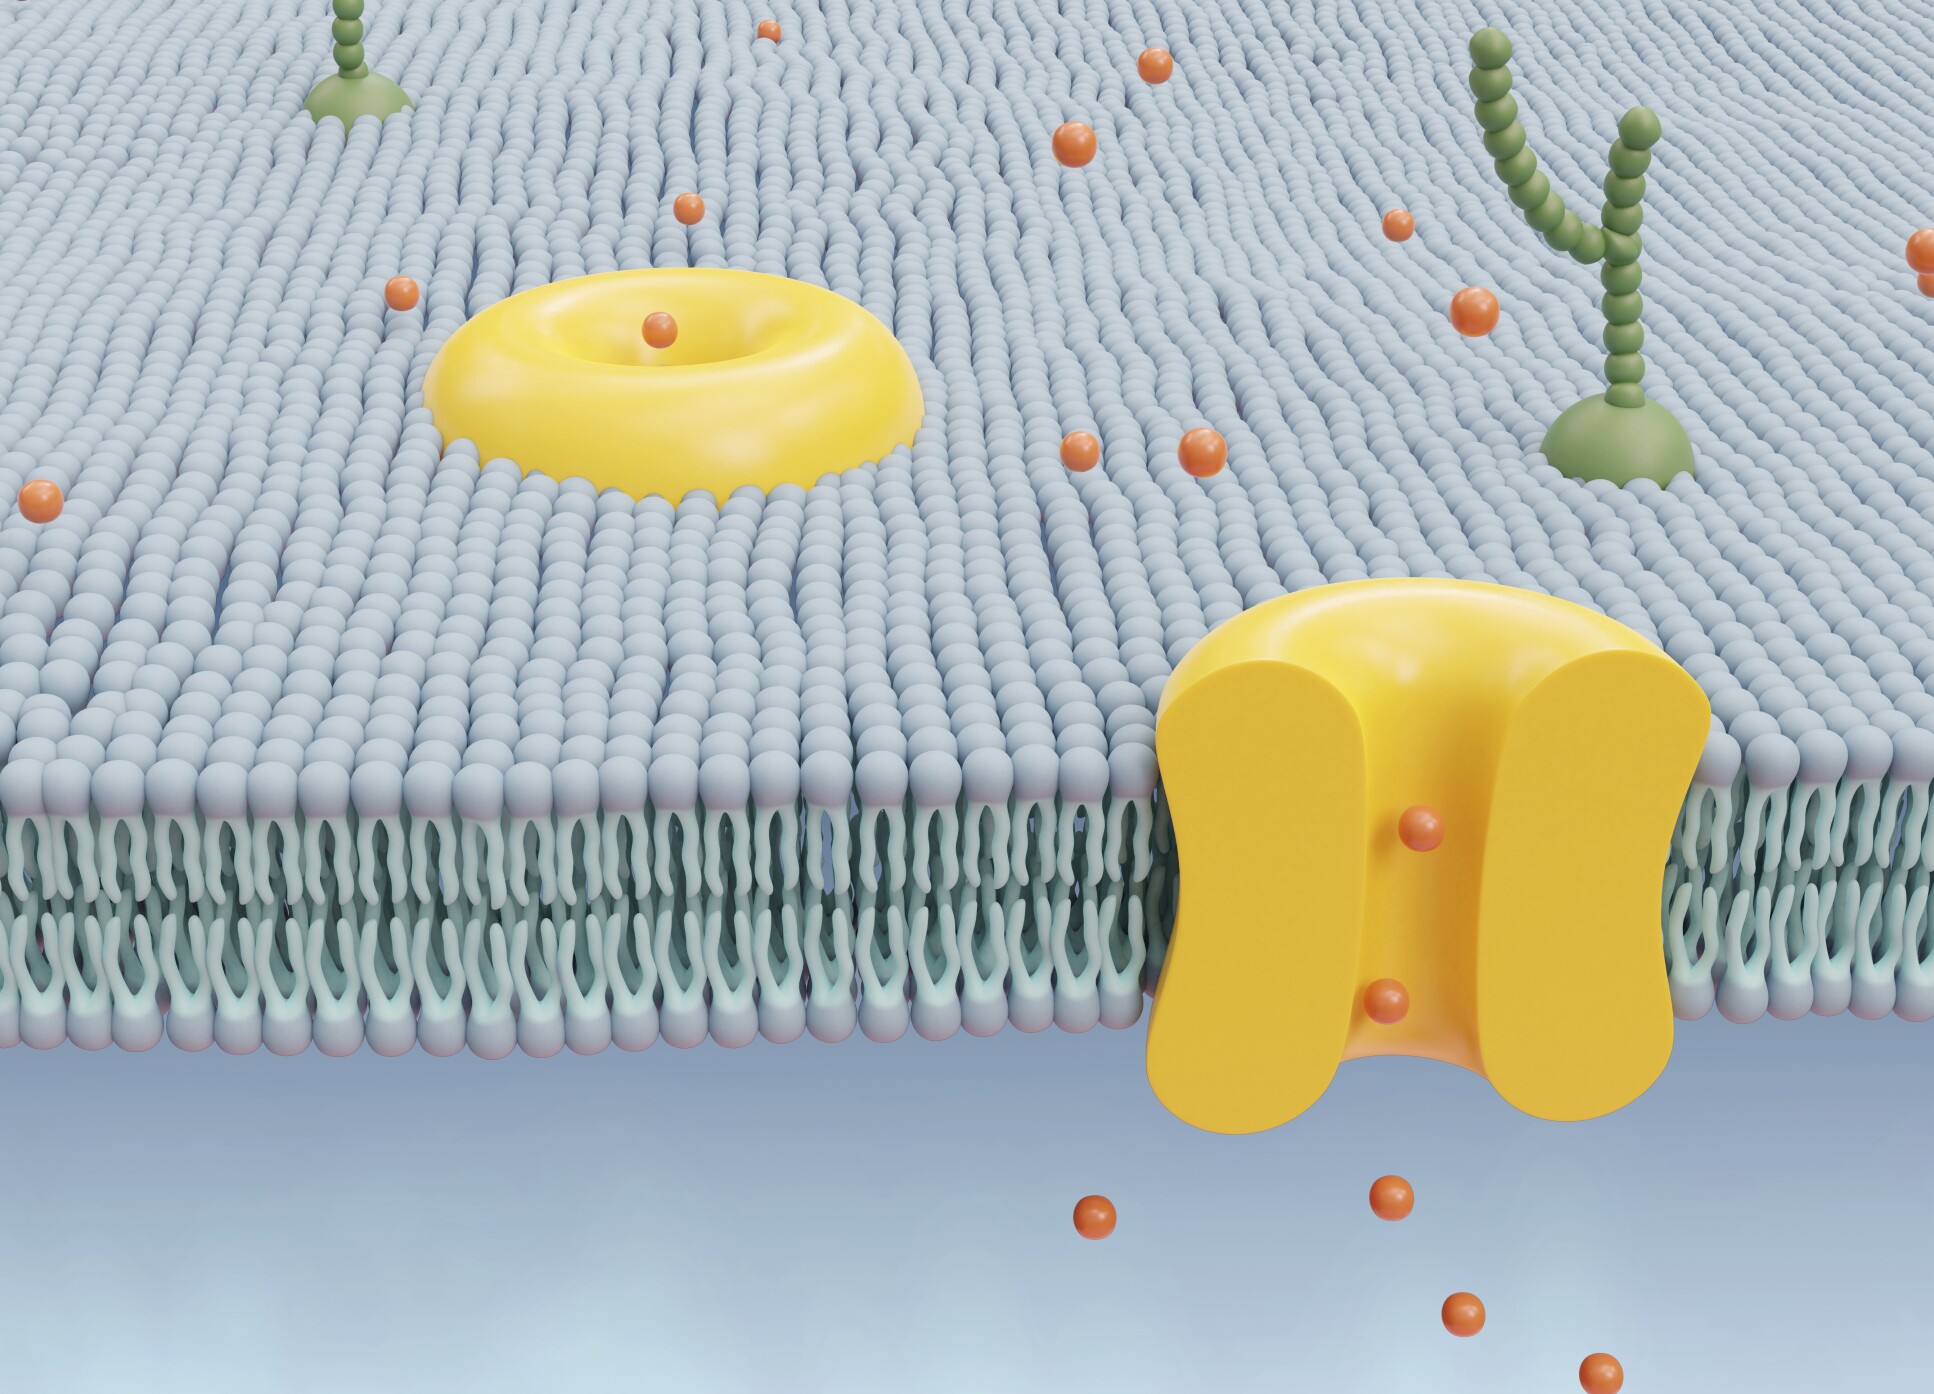 Illustration of a membrane with proteins attached